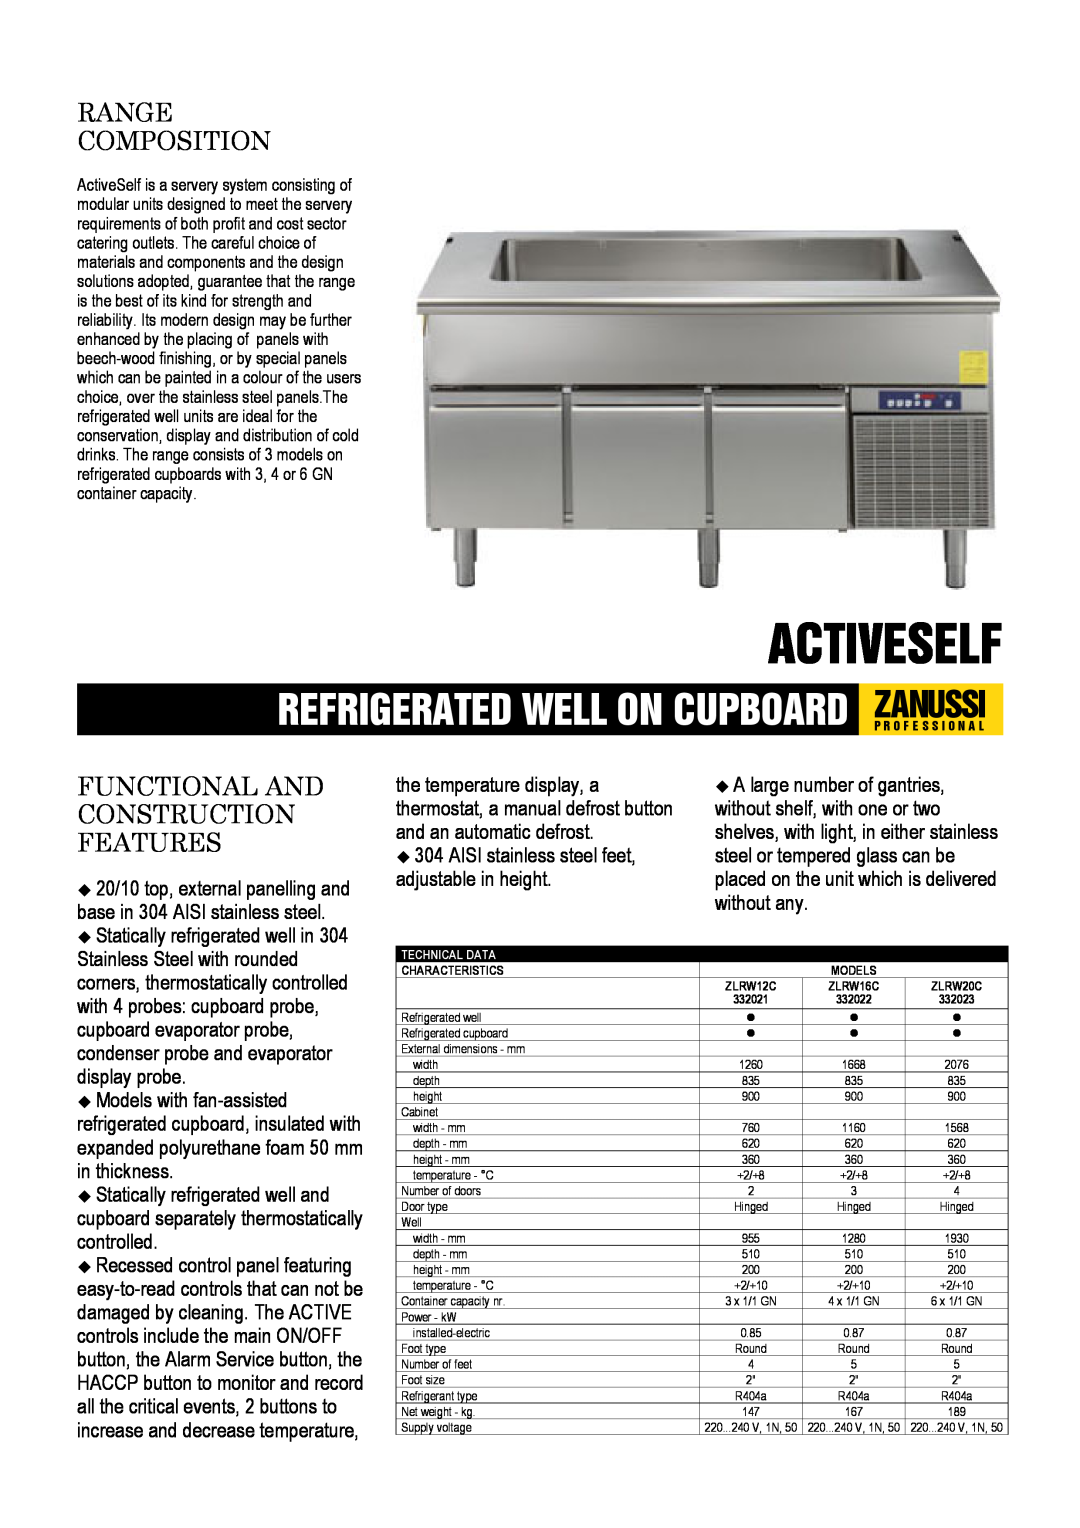 Zanussi 332021, 332022, 332023, ZLRW12C dimensions Activeself, Range Composition, Functional And Construction Features 